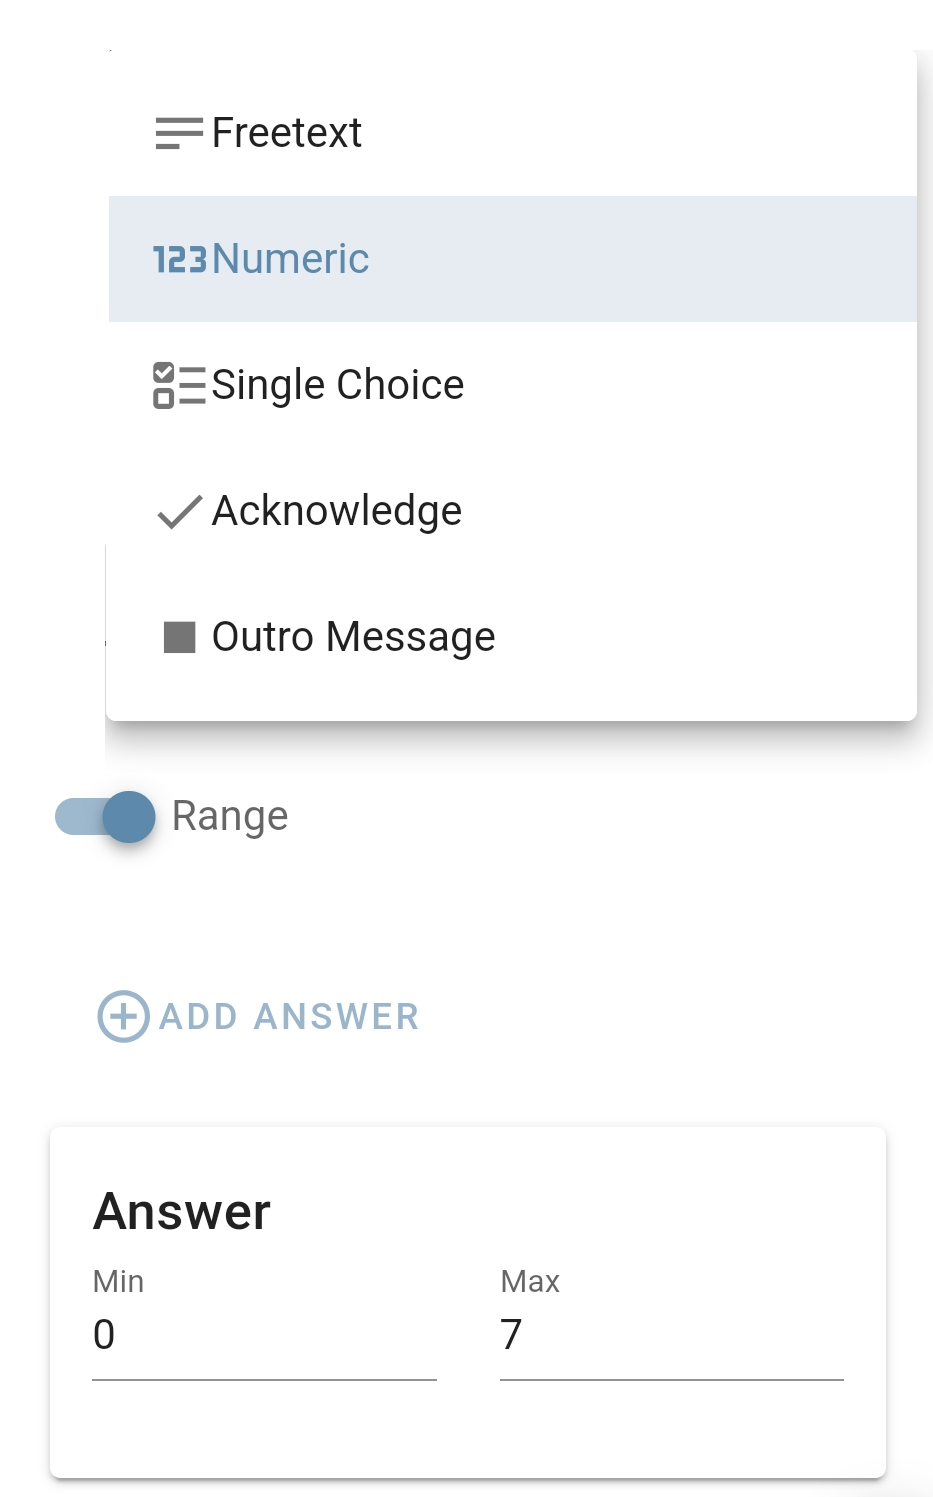 Screenshot of Impaxio's SMS and WhatsApp Survey platform showing how to choose question types and define valid answer ranges for questions. The screenshot shows the question types that can be selected. The answer range is between minimum (showing 0) and maximum (showing 7).